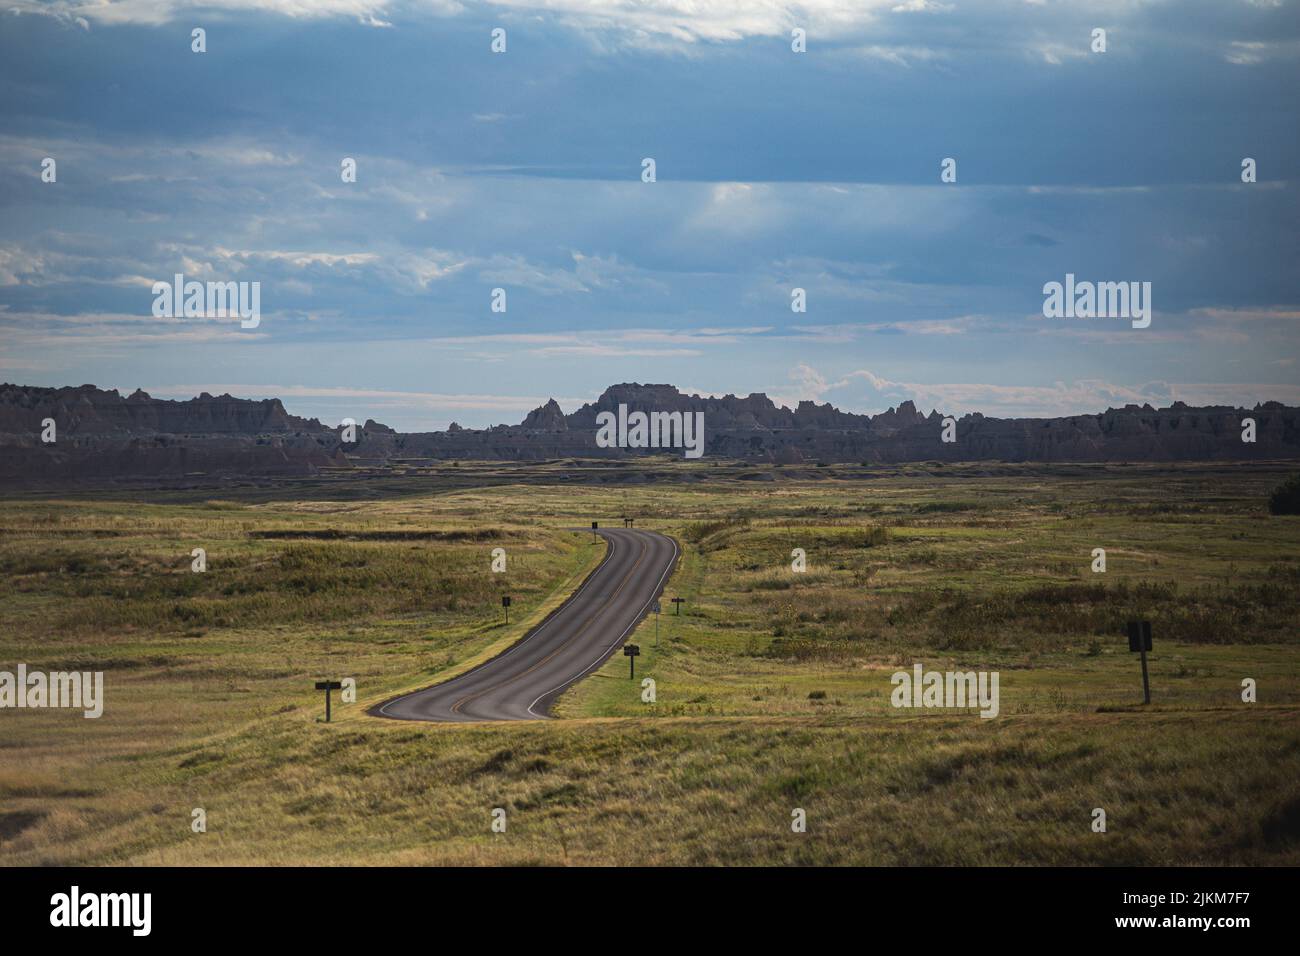 A highway amid green fields on the background of rocky mountains under the blue sky Stock Photo